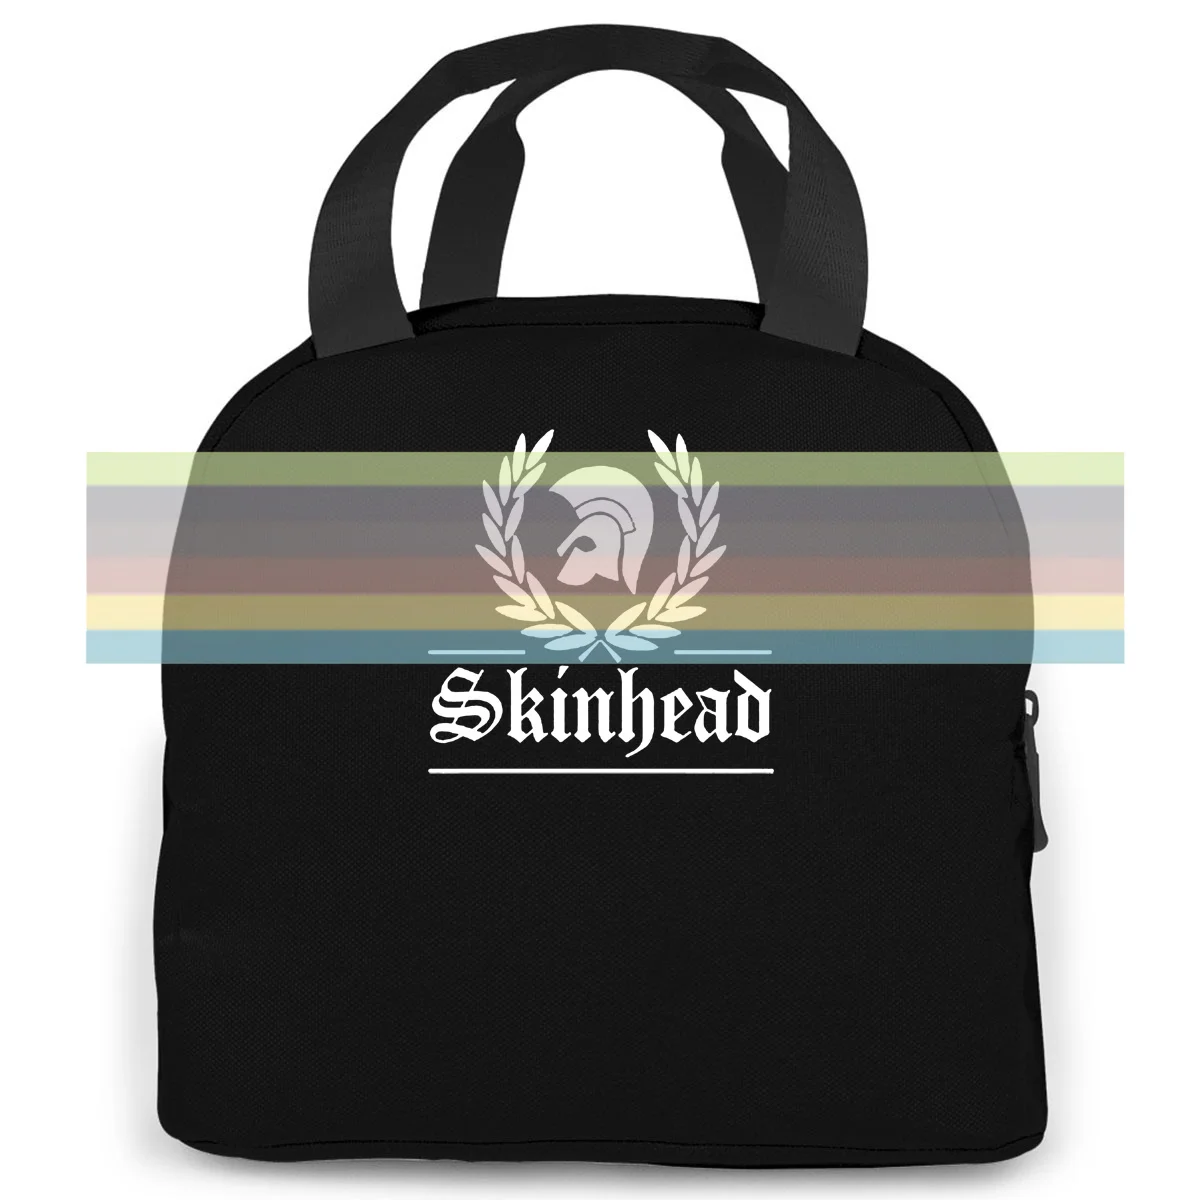 

New Skinhead Society Punk Rock Band Logo Black women men Portable insulated lunch bag adult